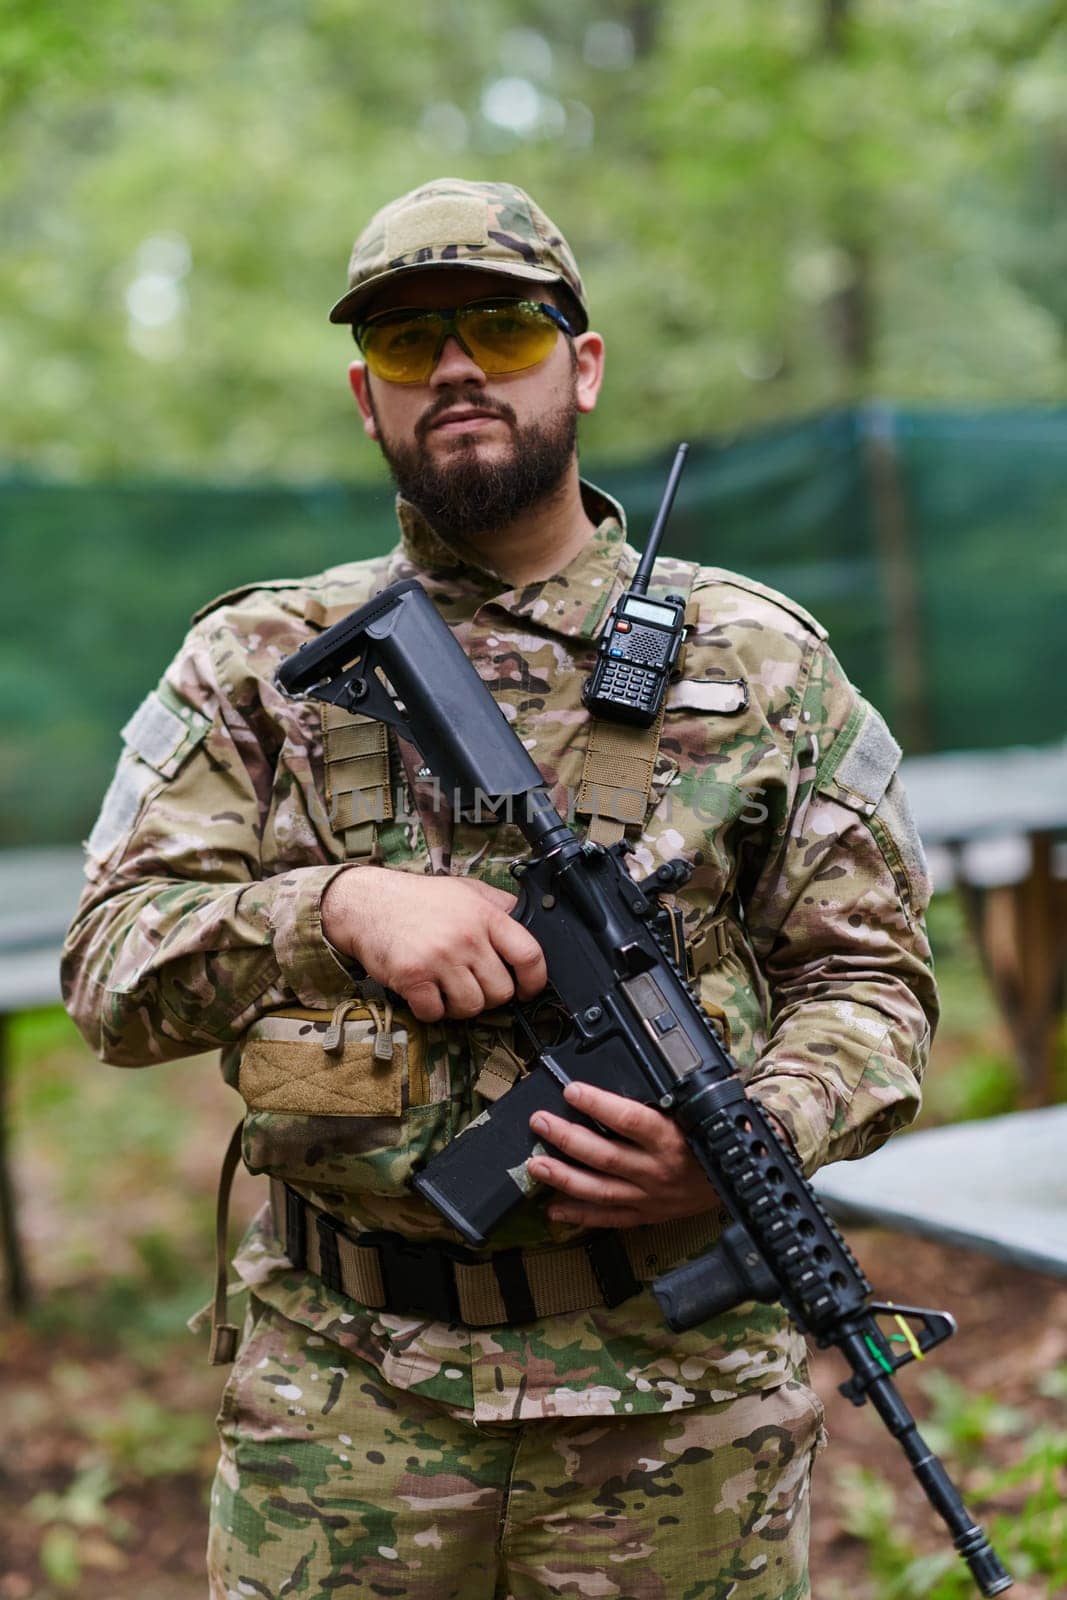 Elite soldier exudes focused determination and readiness, geared up for a perilous military operation, capturing the essence of courage and professionalism in the face of imminent danger.